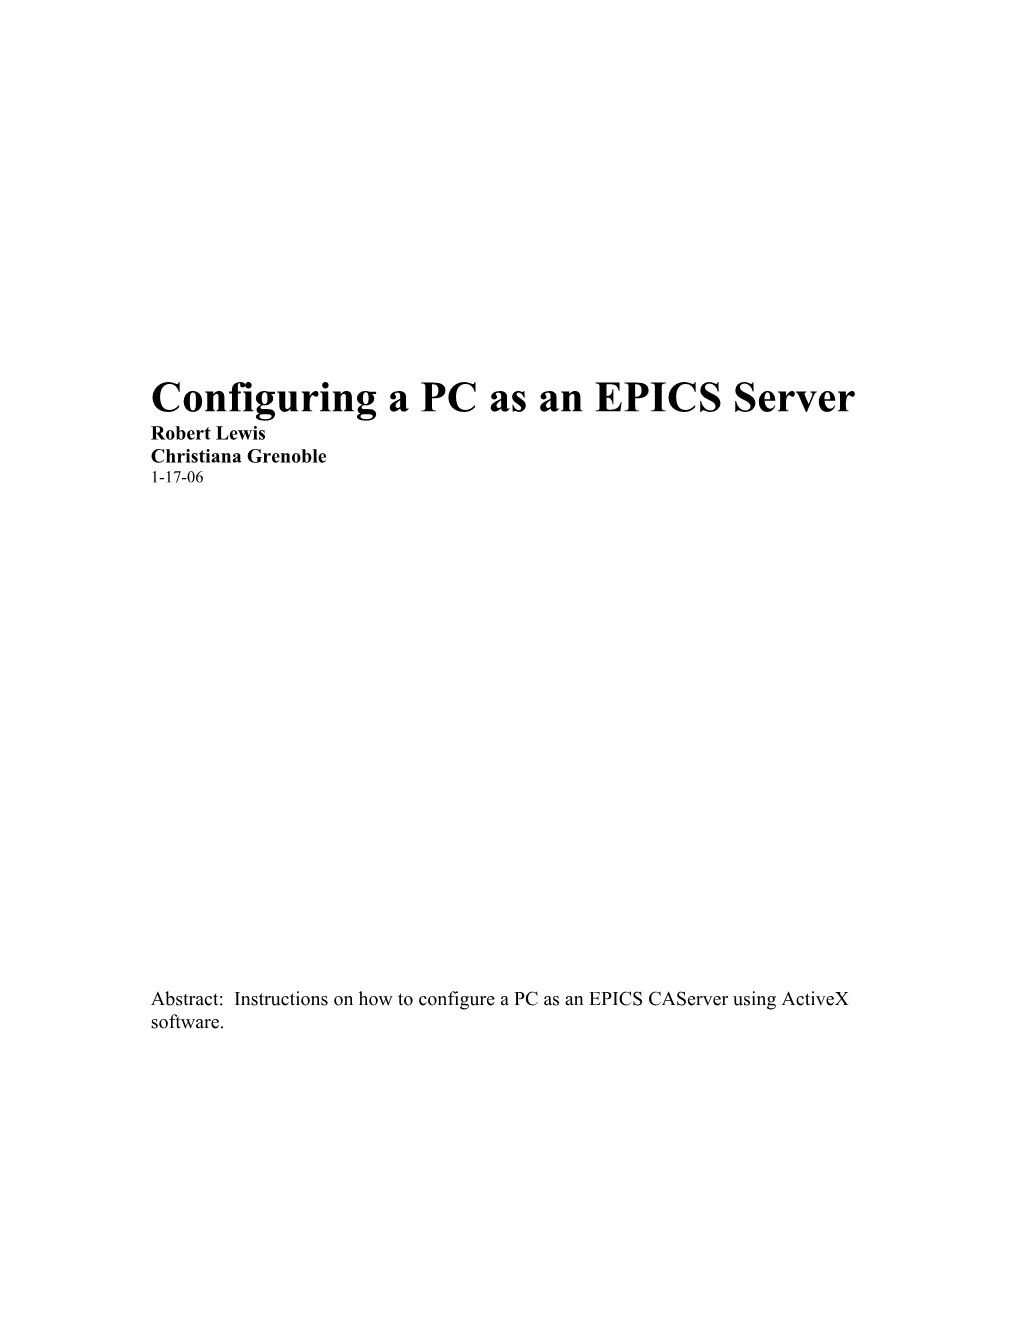 EPICS Is a Set of Tools, Normally Used in a UNIX Environment, That Provide Data Acquisition